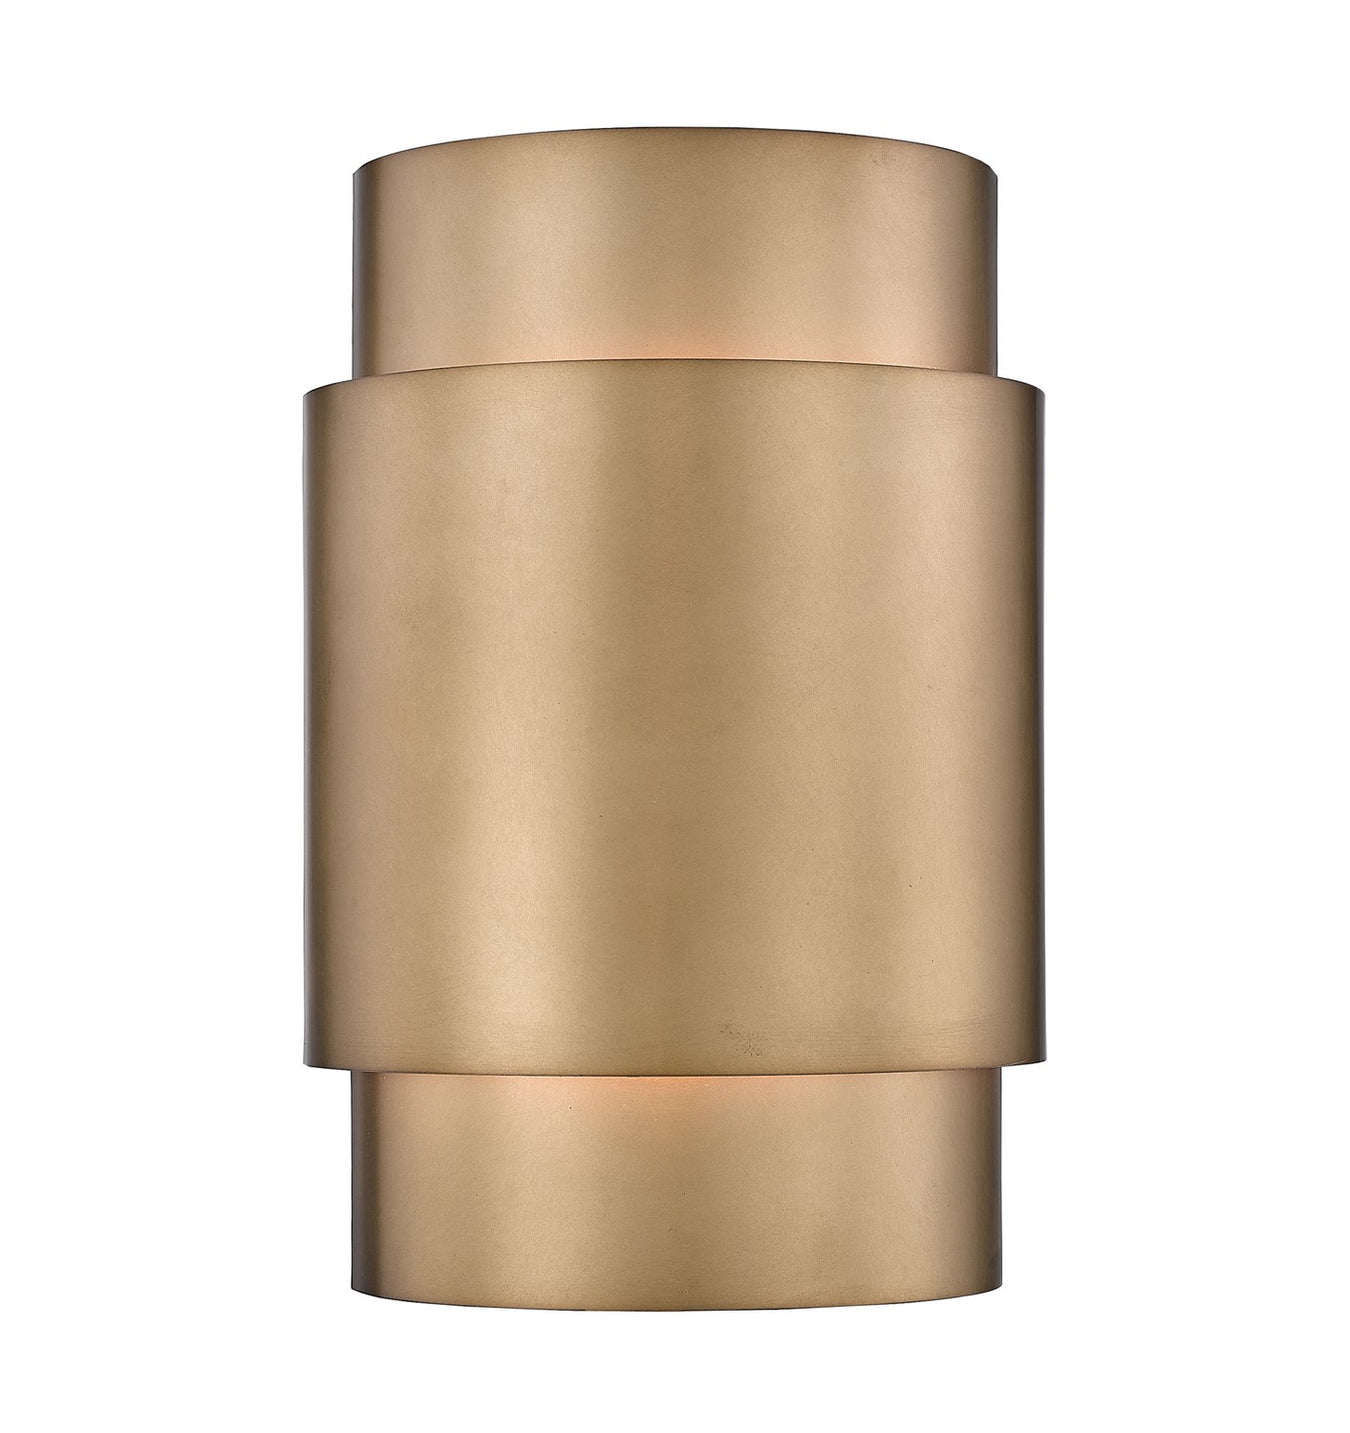 Harlech Two Light Wall Sconce in Rubbed Brass by Z-Lite Lighting